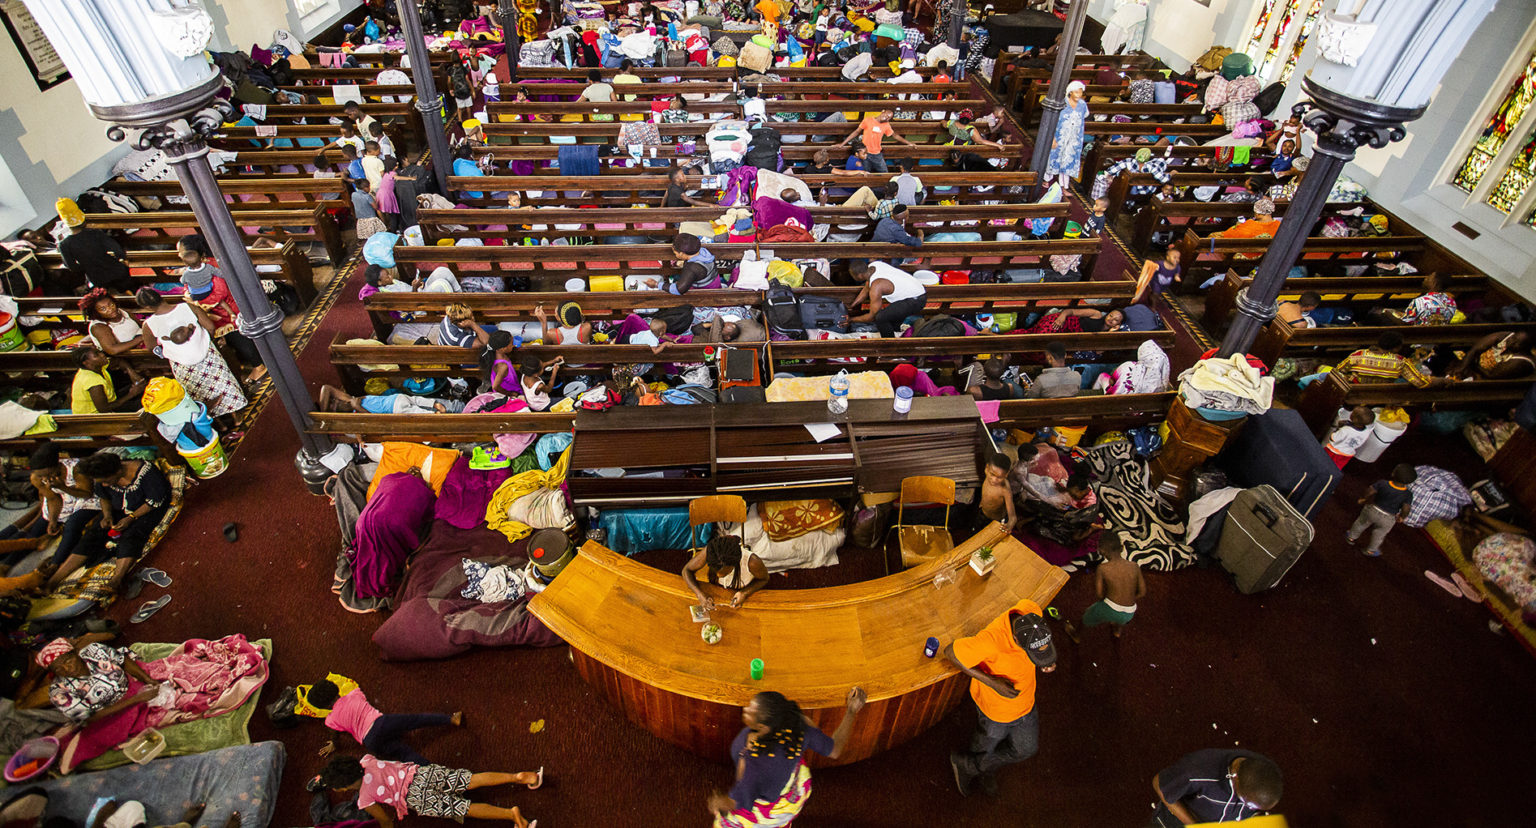 CAPE TOWN, SOUTH AFRICA - JANUARY Refugees at the Central Methodist Church in Green Market Square on 23 January 2020 in Cape Town. (Photo: Gallo Images / Jacques Stander)